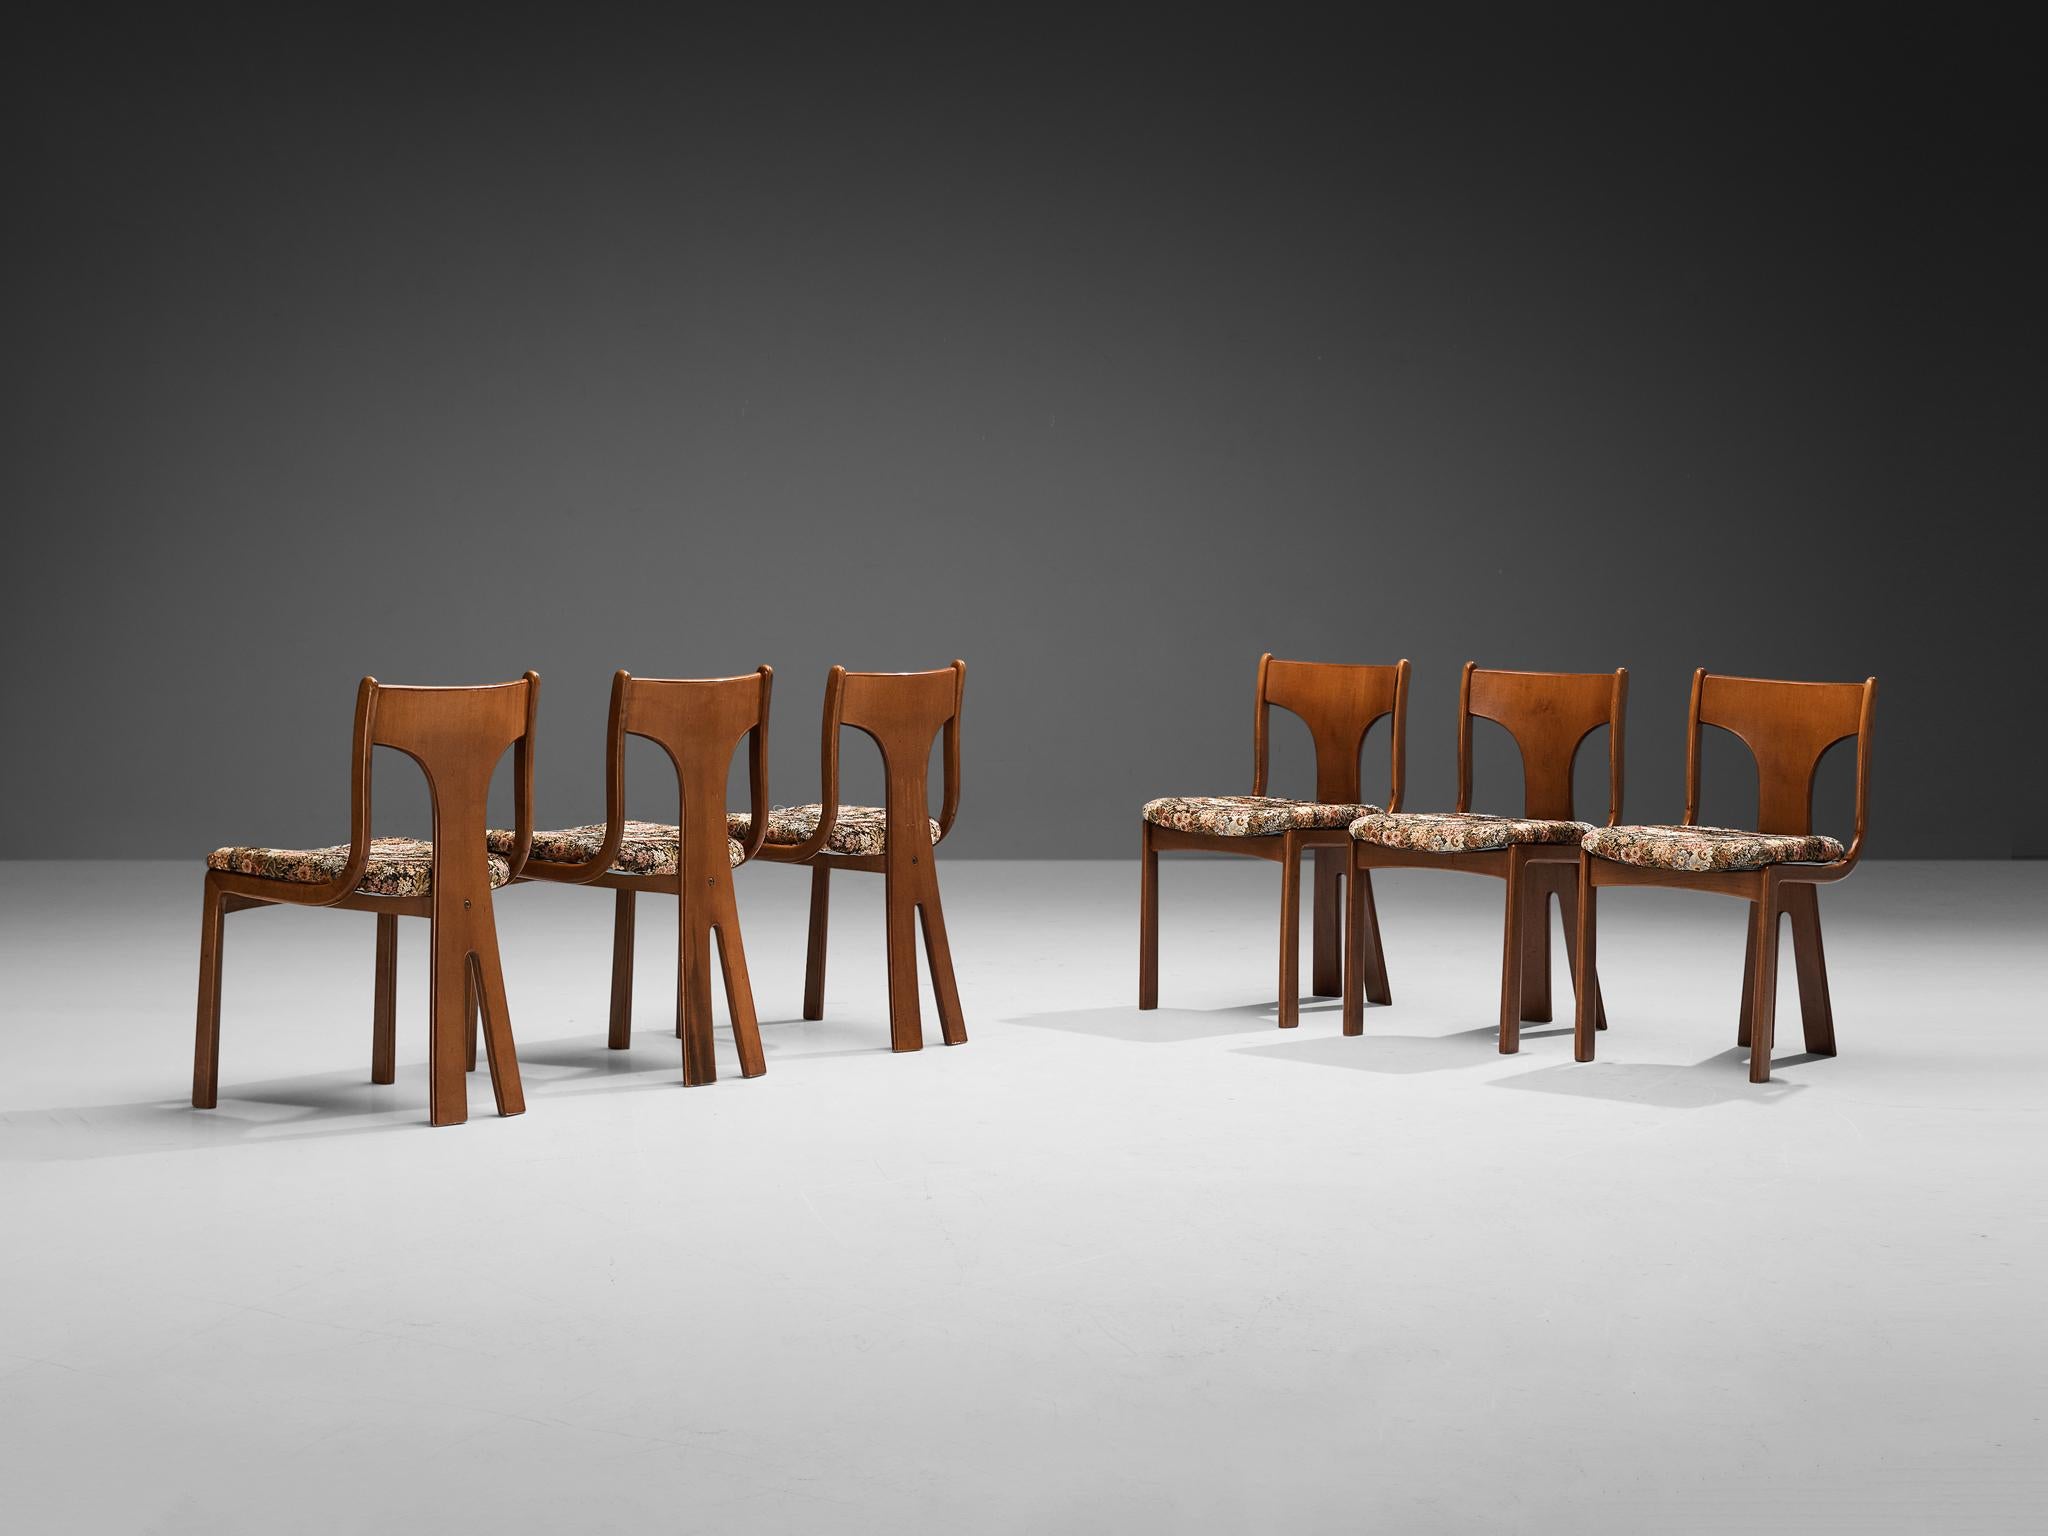 Mid-20th Century Italian Set of Six Sculptural Dining Chairs in Wood and Floral Upholstery For Sale